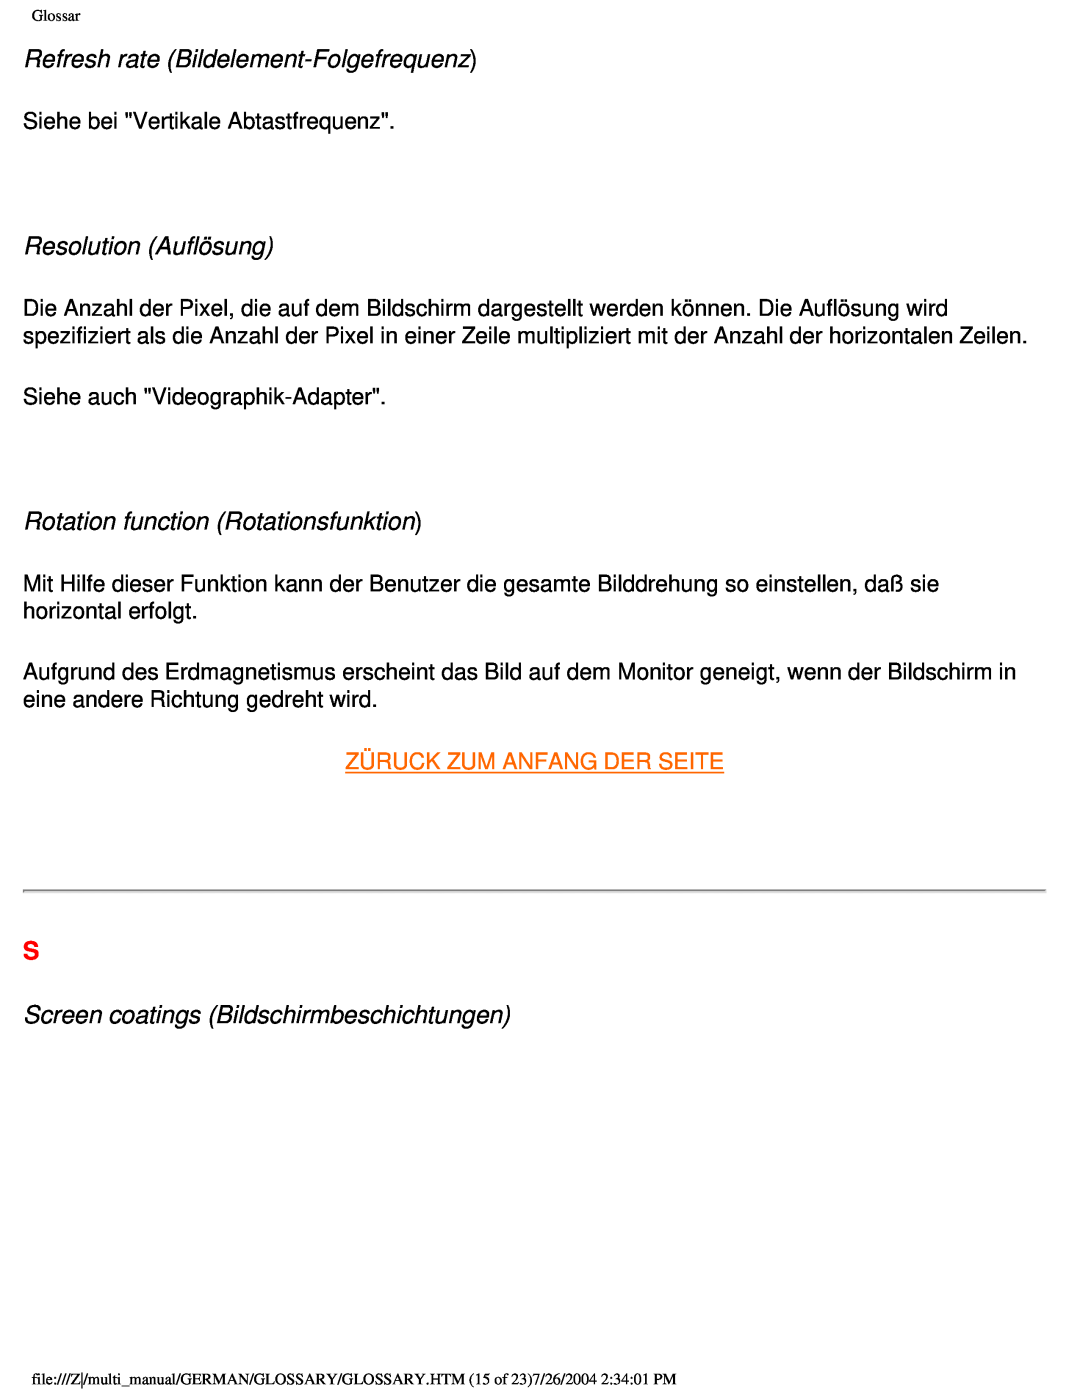 Philips 107X2 user manual Refresh rate Bildelement-Folgefrequenz, Resolution Auflösung, Rotation function Rotationsfunktion 